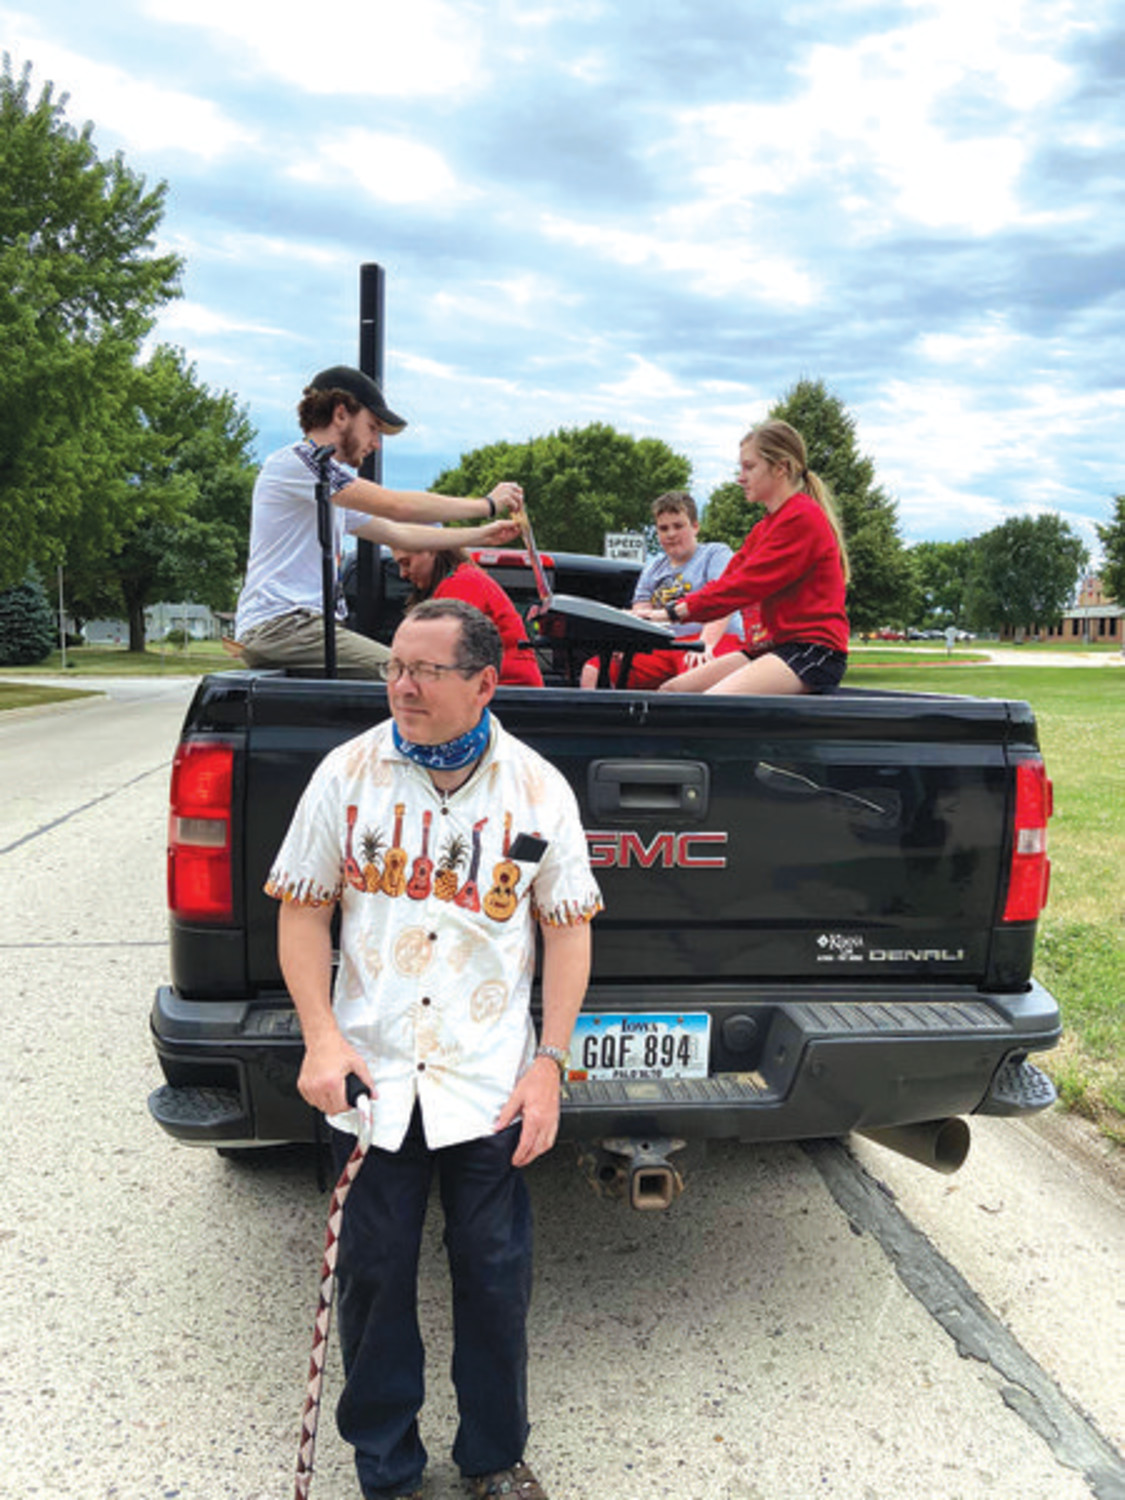 SINGING ROAD TRIP -- Pastor Peter Morlock (front) led the talent parade around Horizons Unlimited homes. Pictured i the truck are?Jonah Morlock, Kristin Reinhart, Jamison Boevers and Gabrielle Janssen.